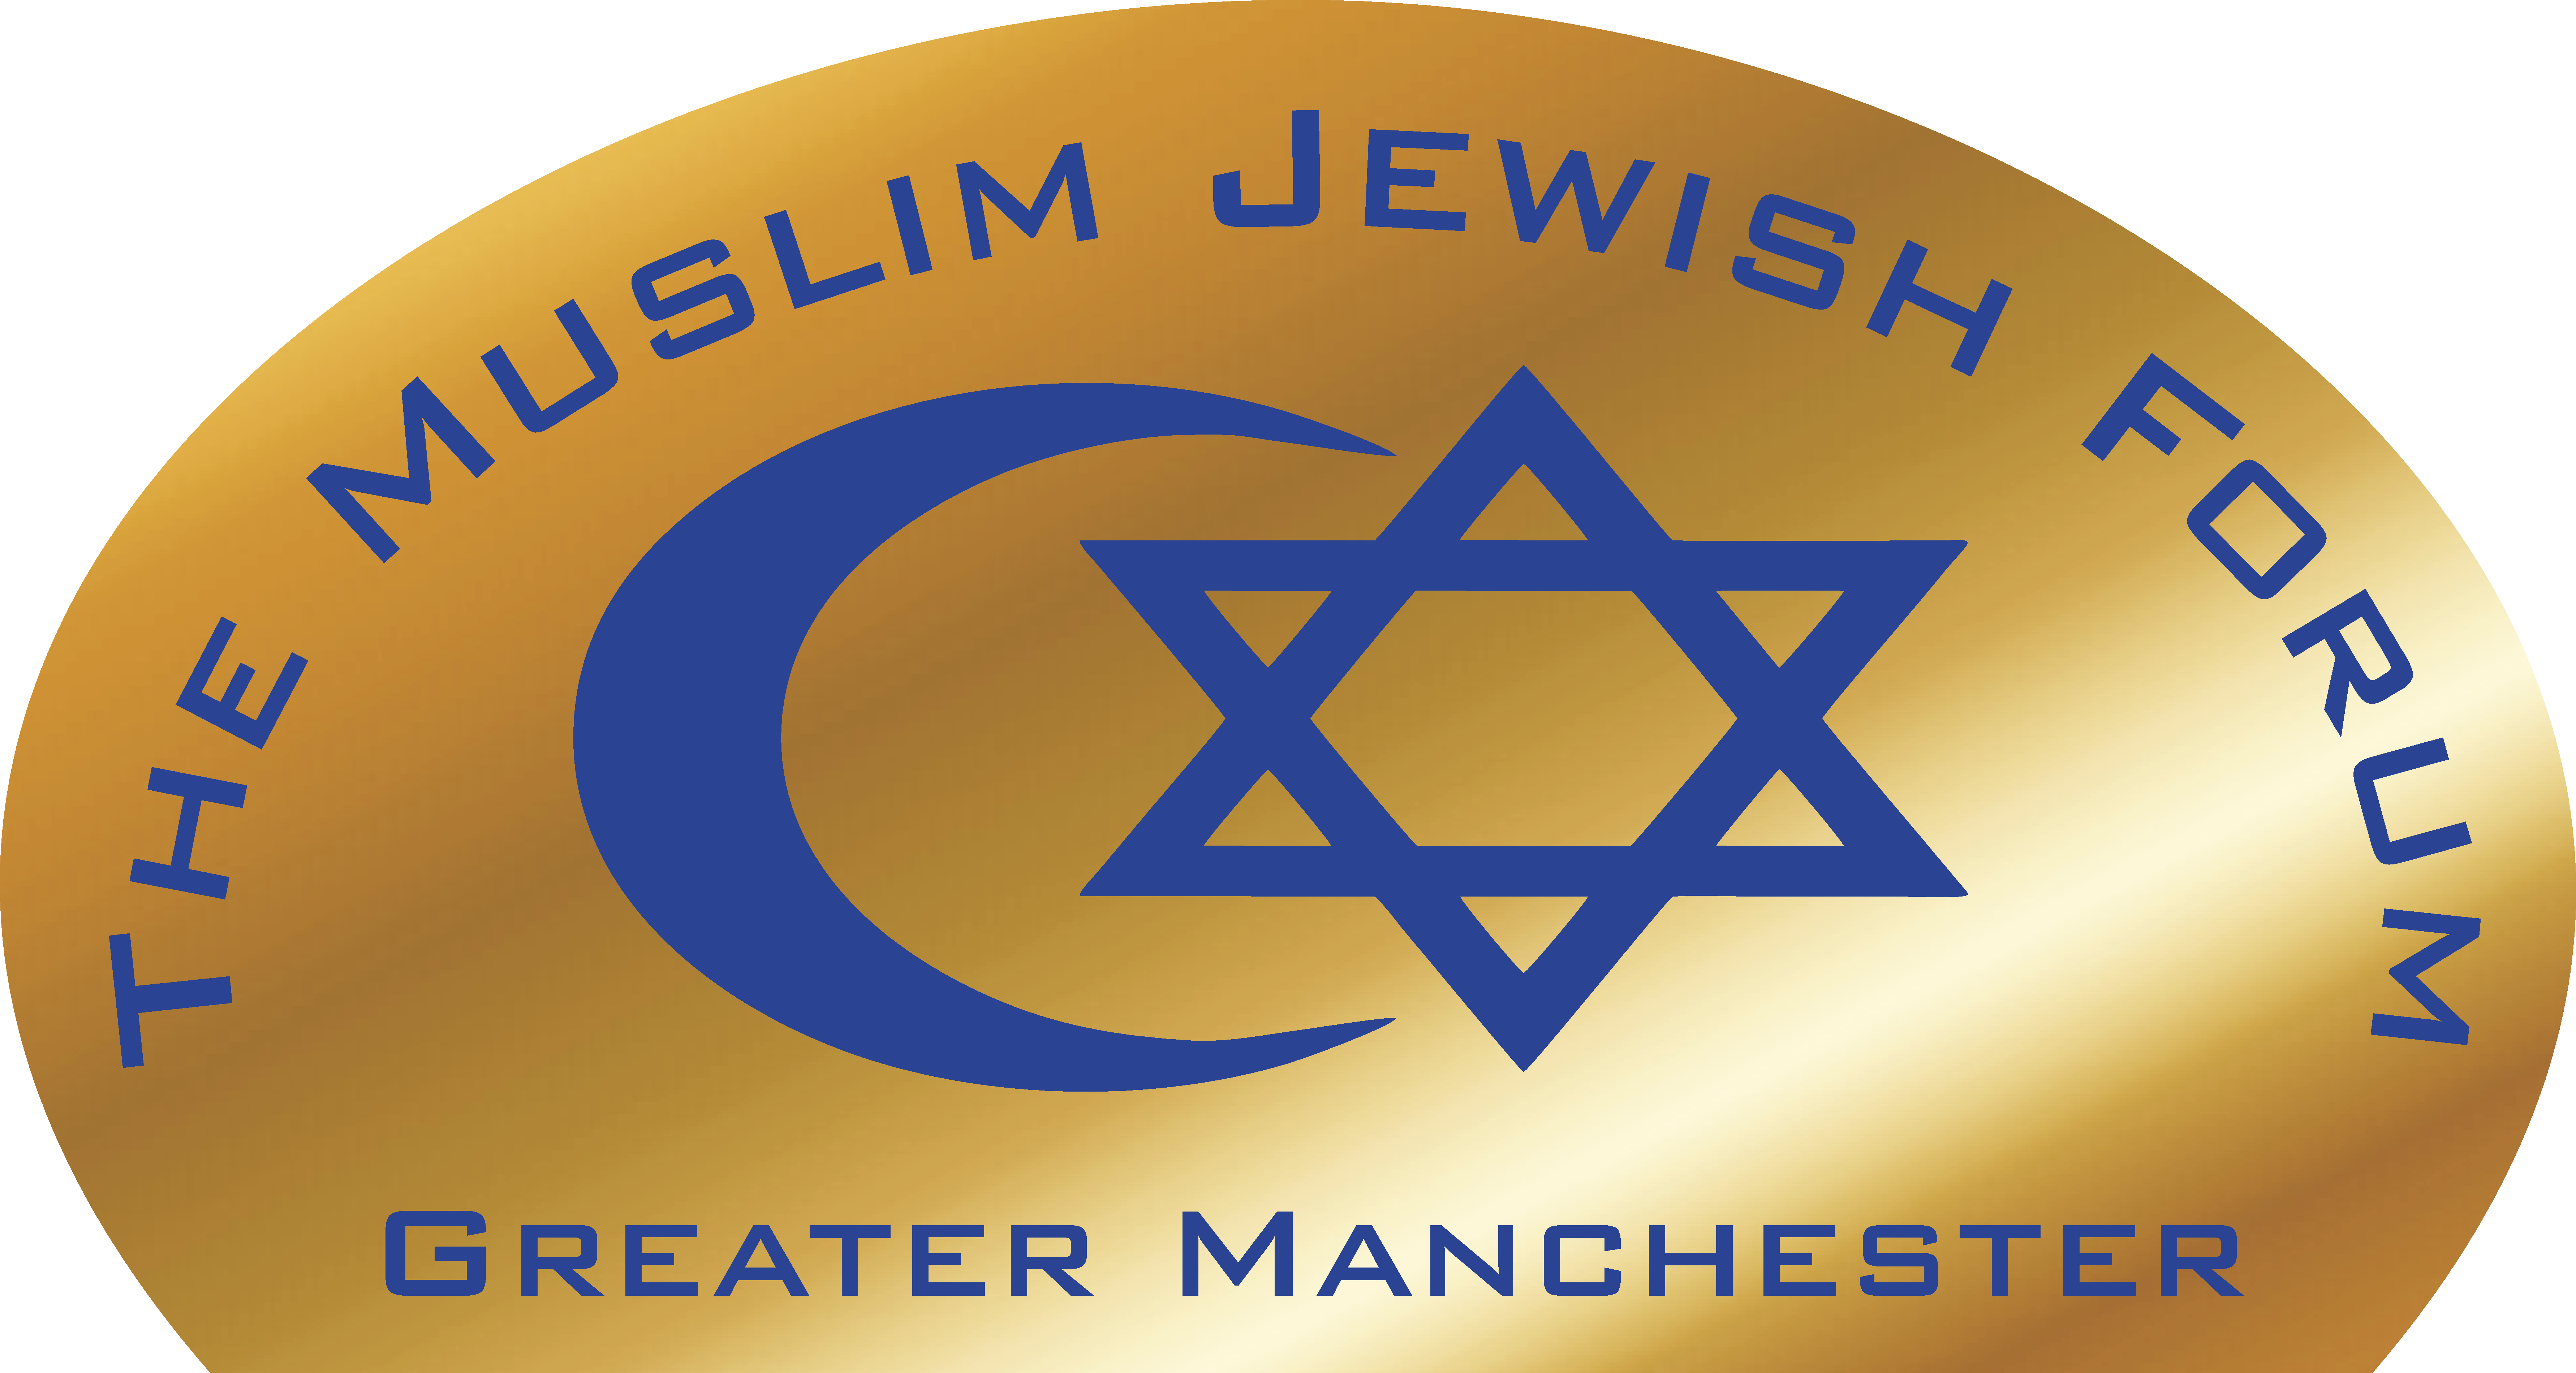 The Muslim Jewish Forum of Greater Manchester logo